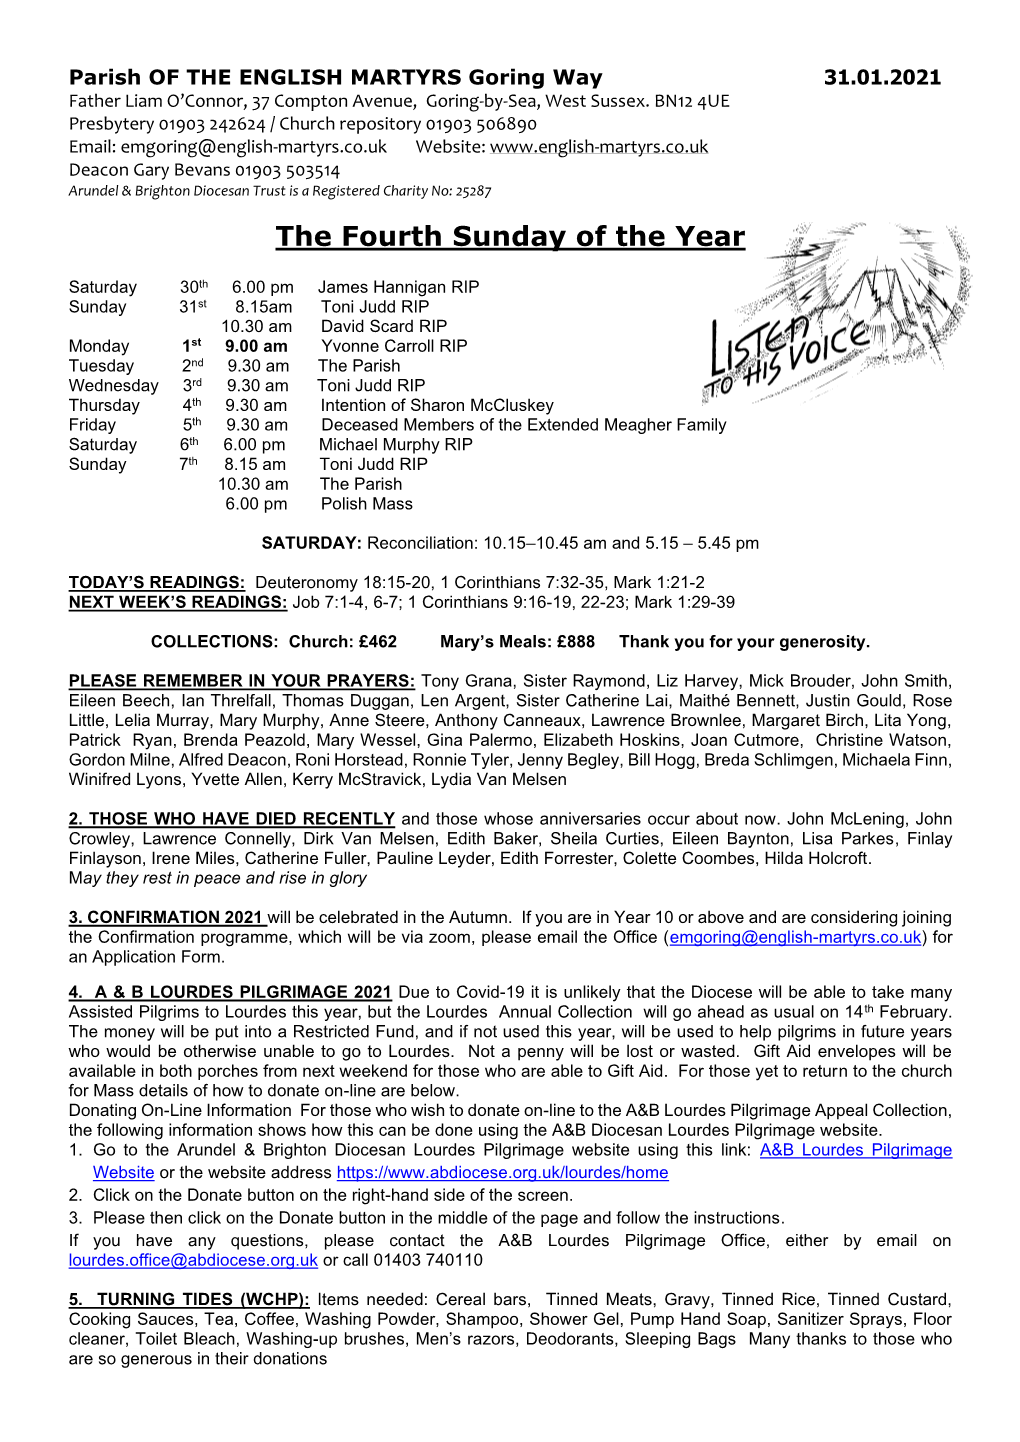 The Fourth Sunday of the Year